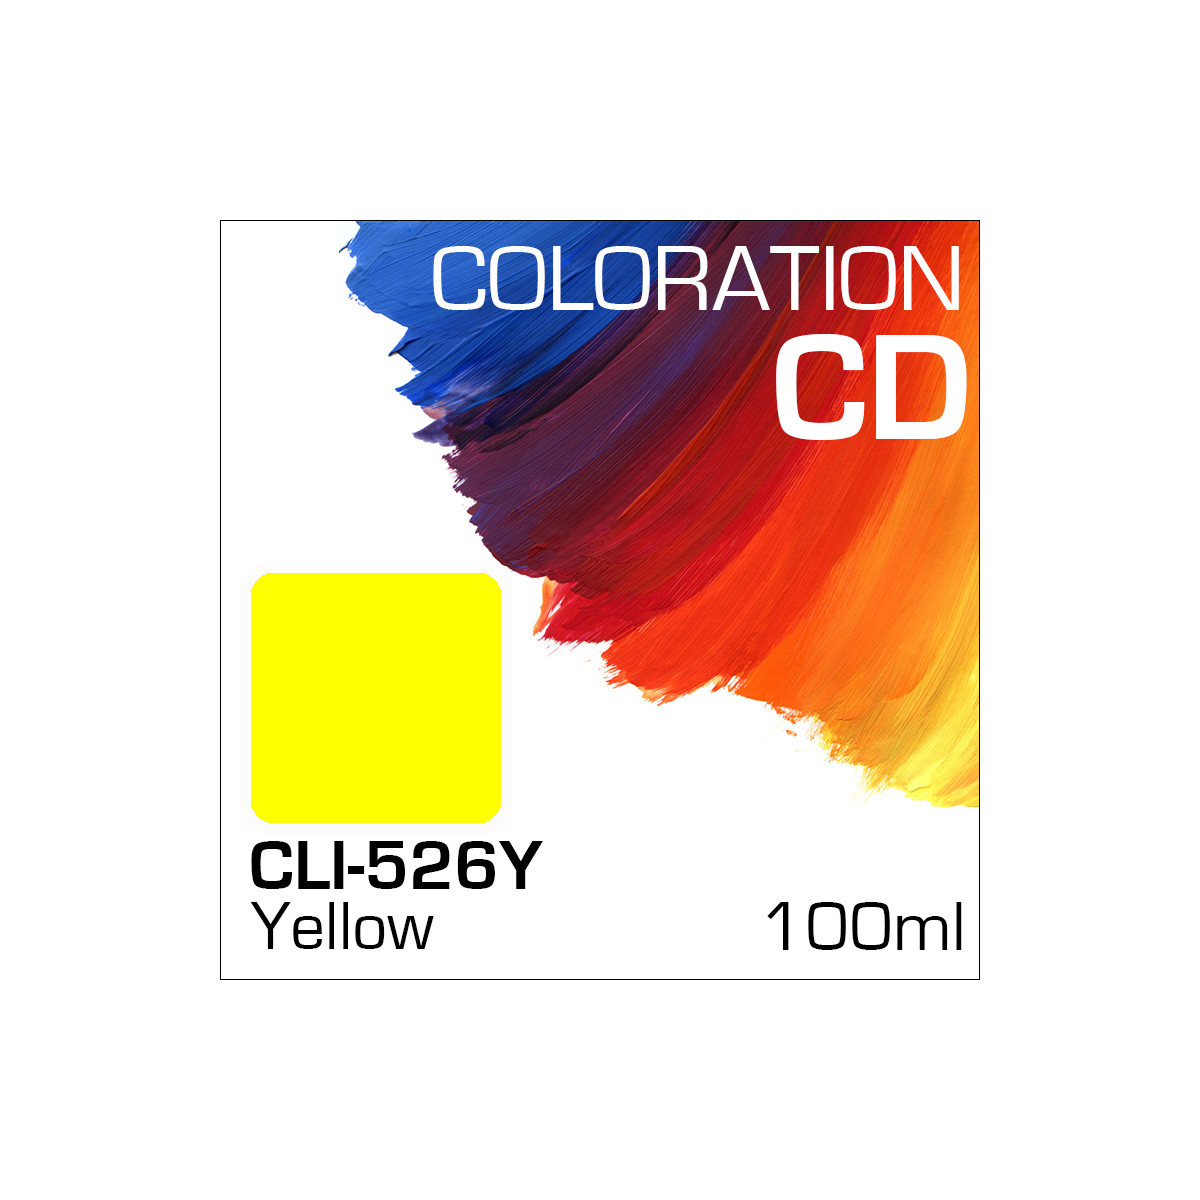 Coloration CD Flasche 100ml CLI-526Y Yellow